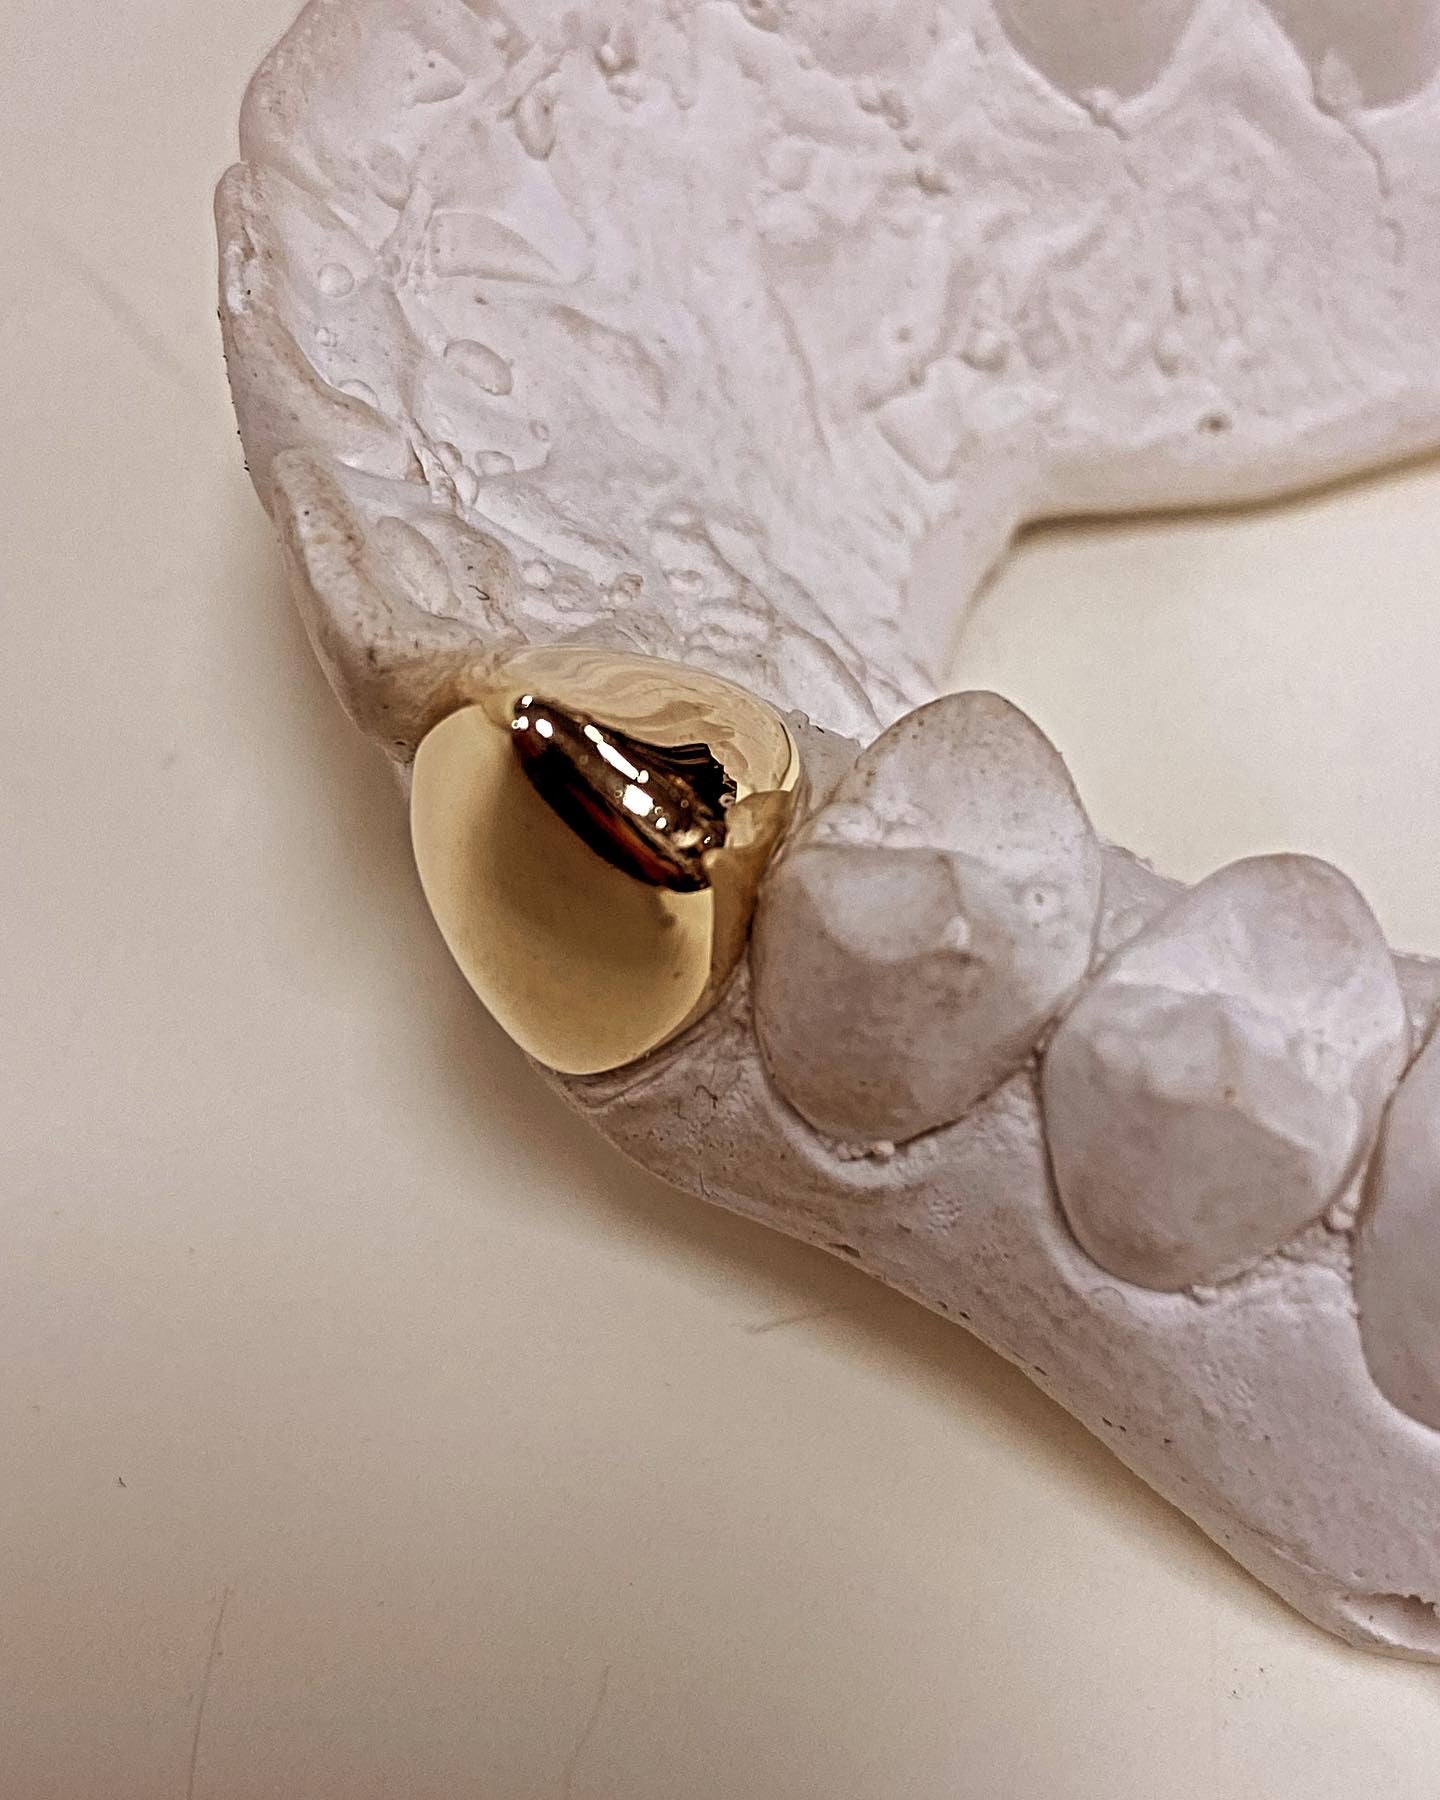 One tooth capped in 9kt gold, your design of choice